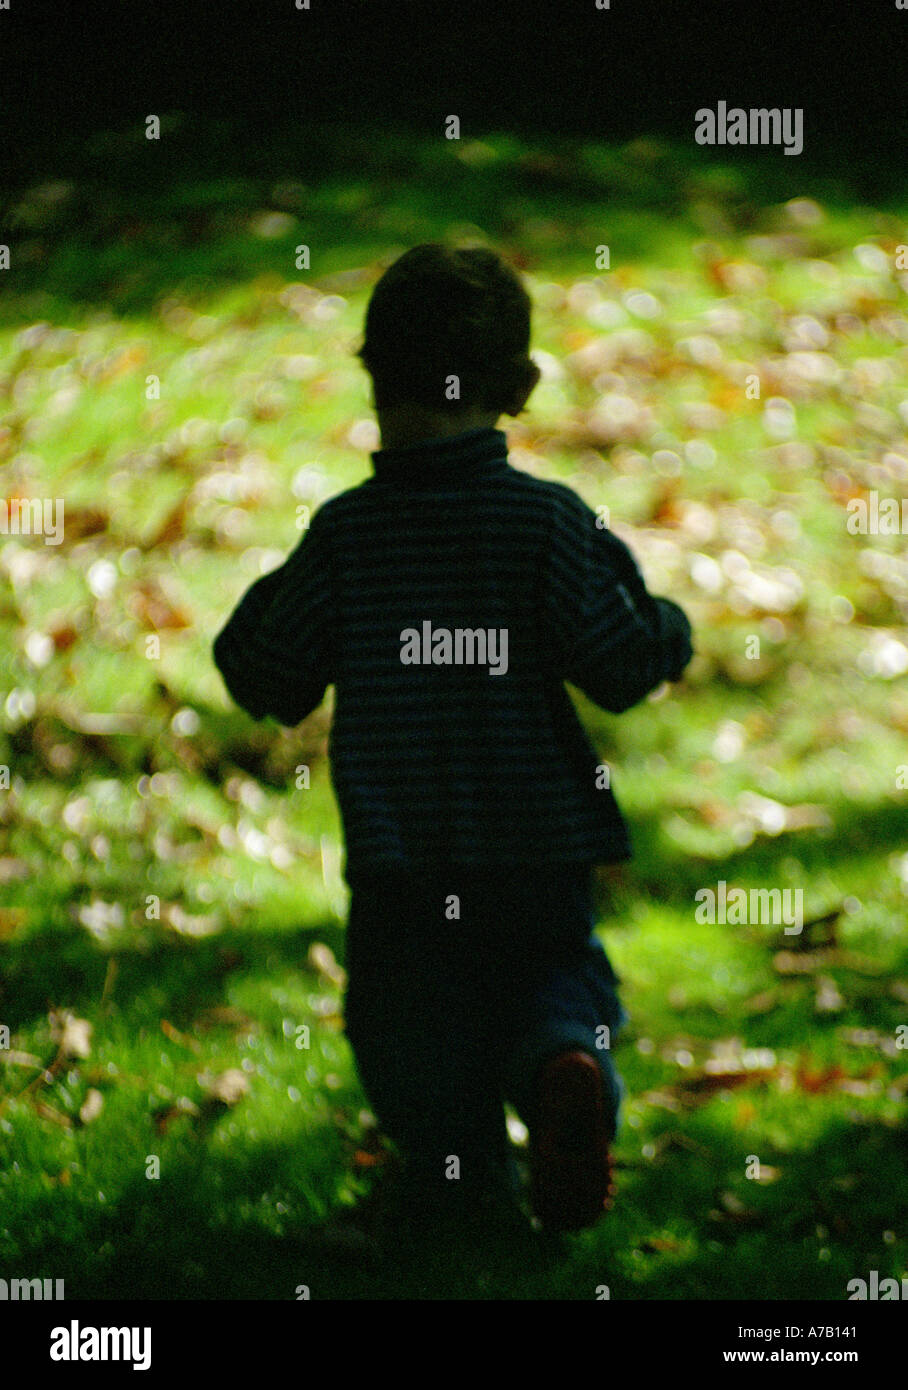 sillouette of a small child in a garden Stock Photo